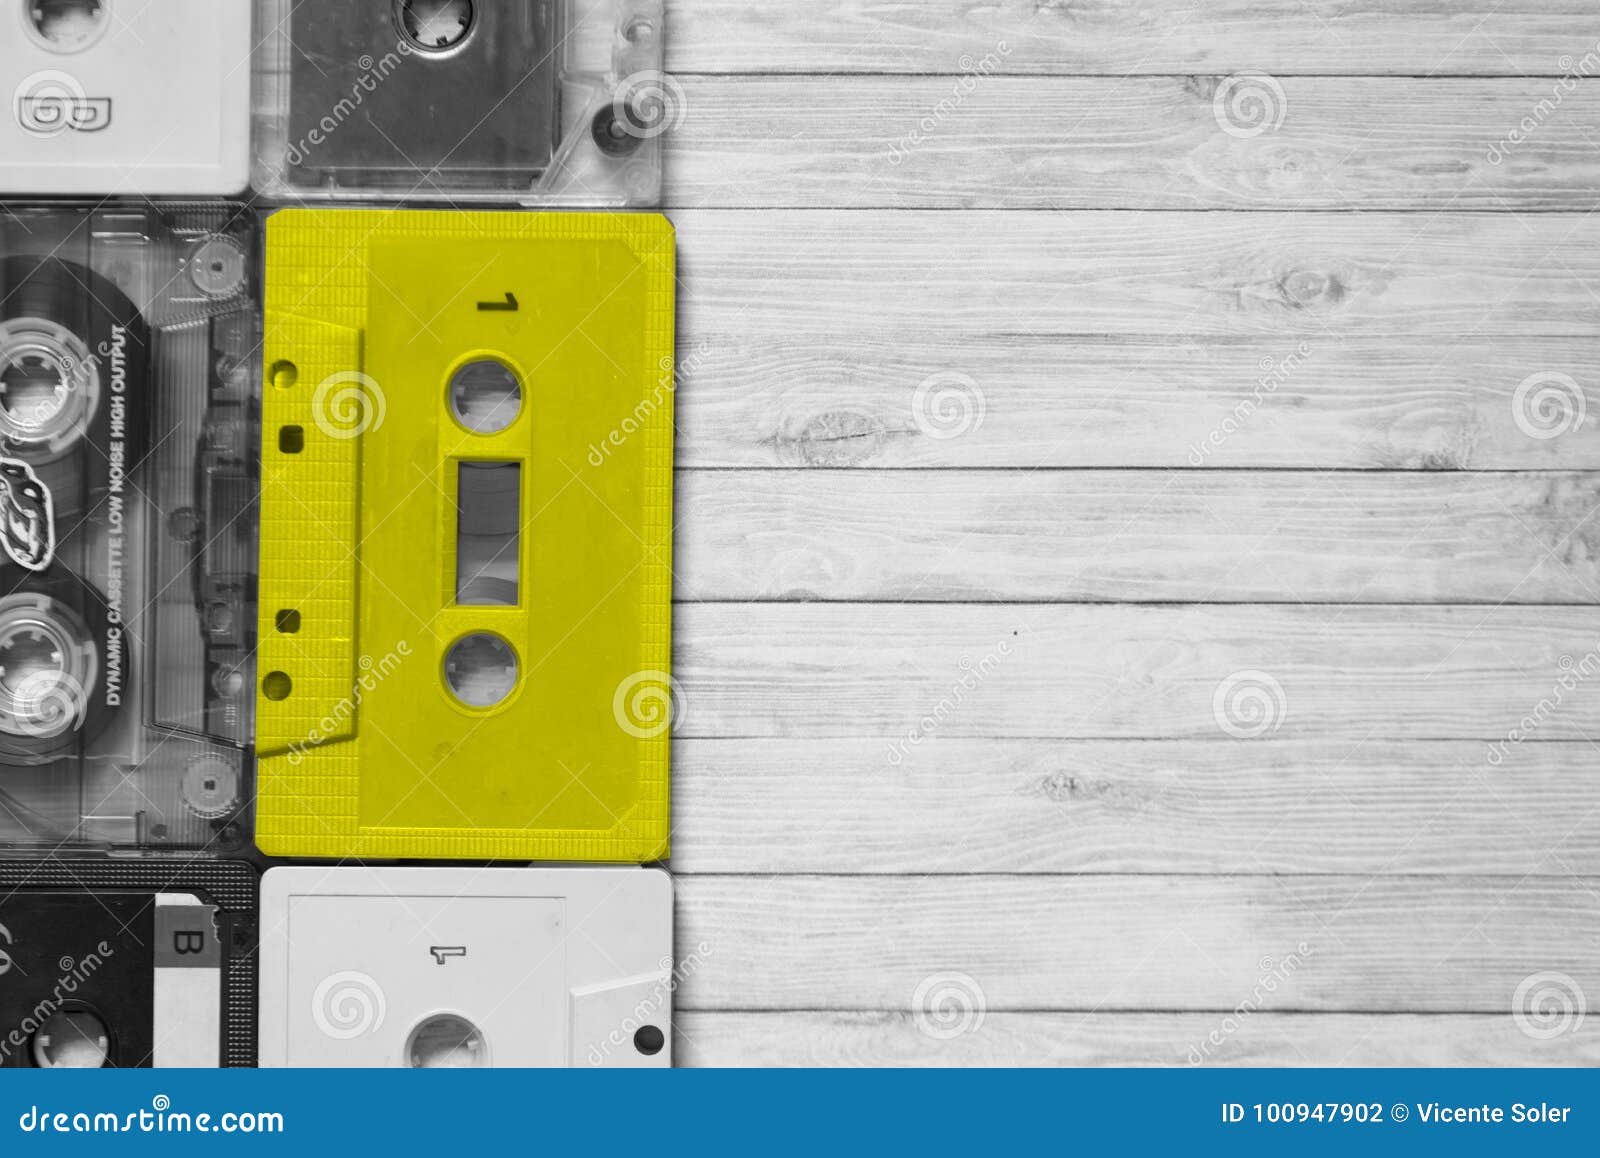 old cassette tapes with a wooden